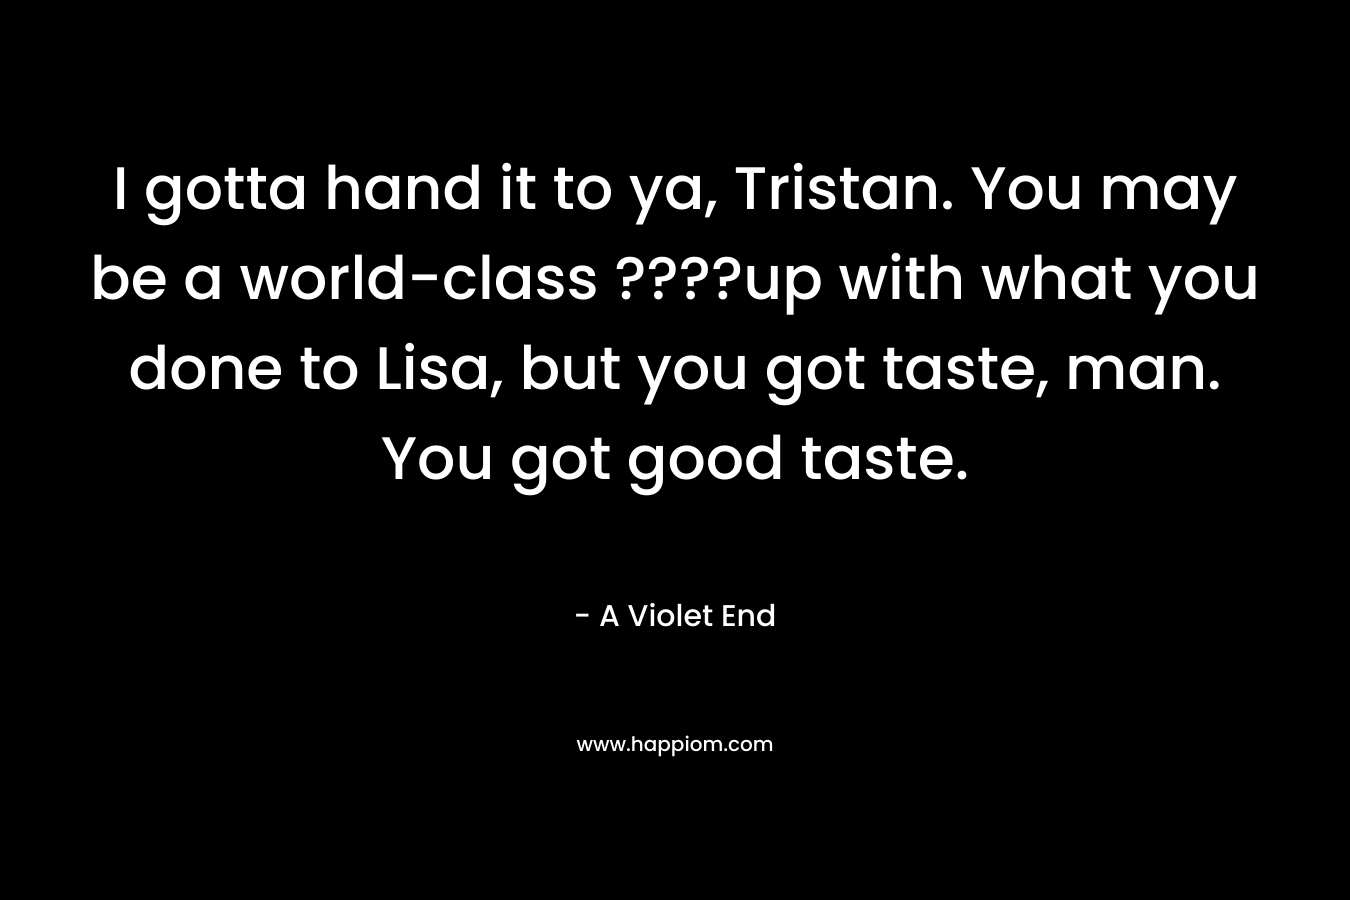 I gotta hand it to ya, Tristan. You may be a world-class ????up with what you done to Lisa, but you got taste, man. You got good taste. – A Violet End